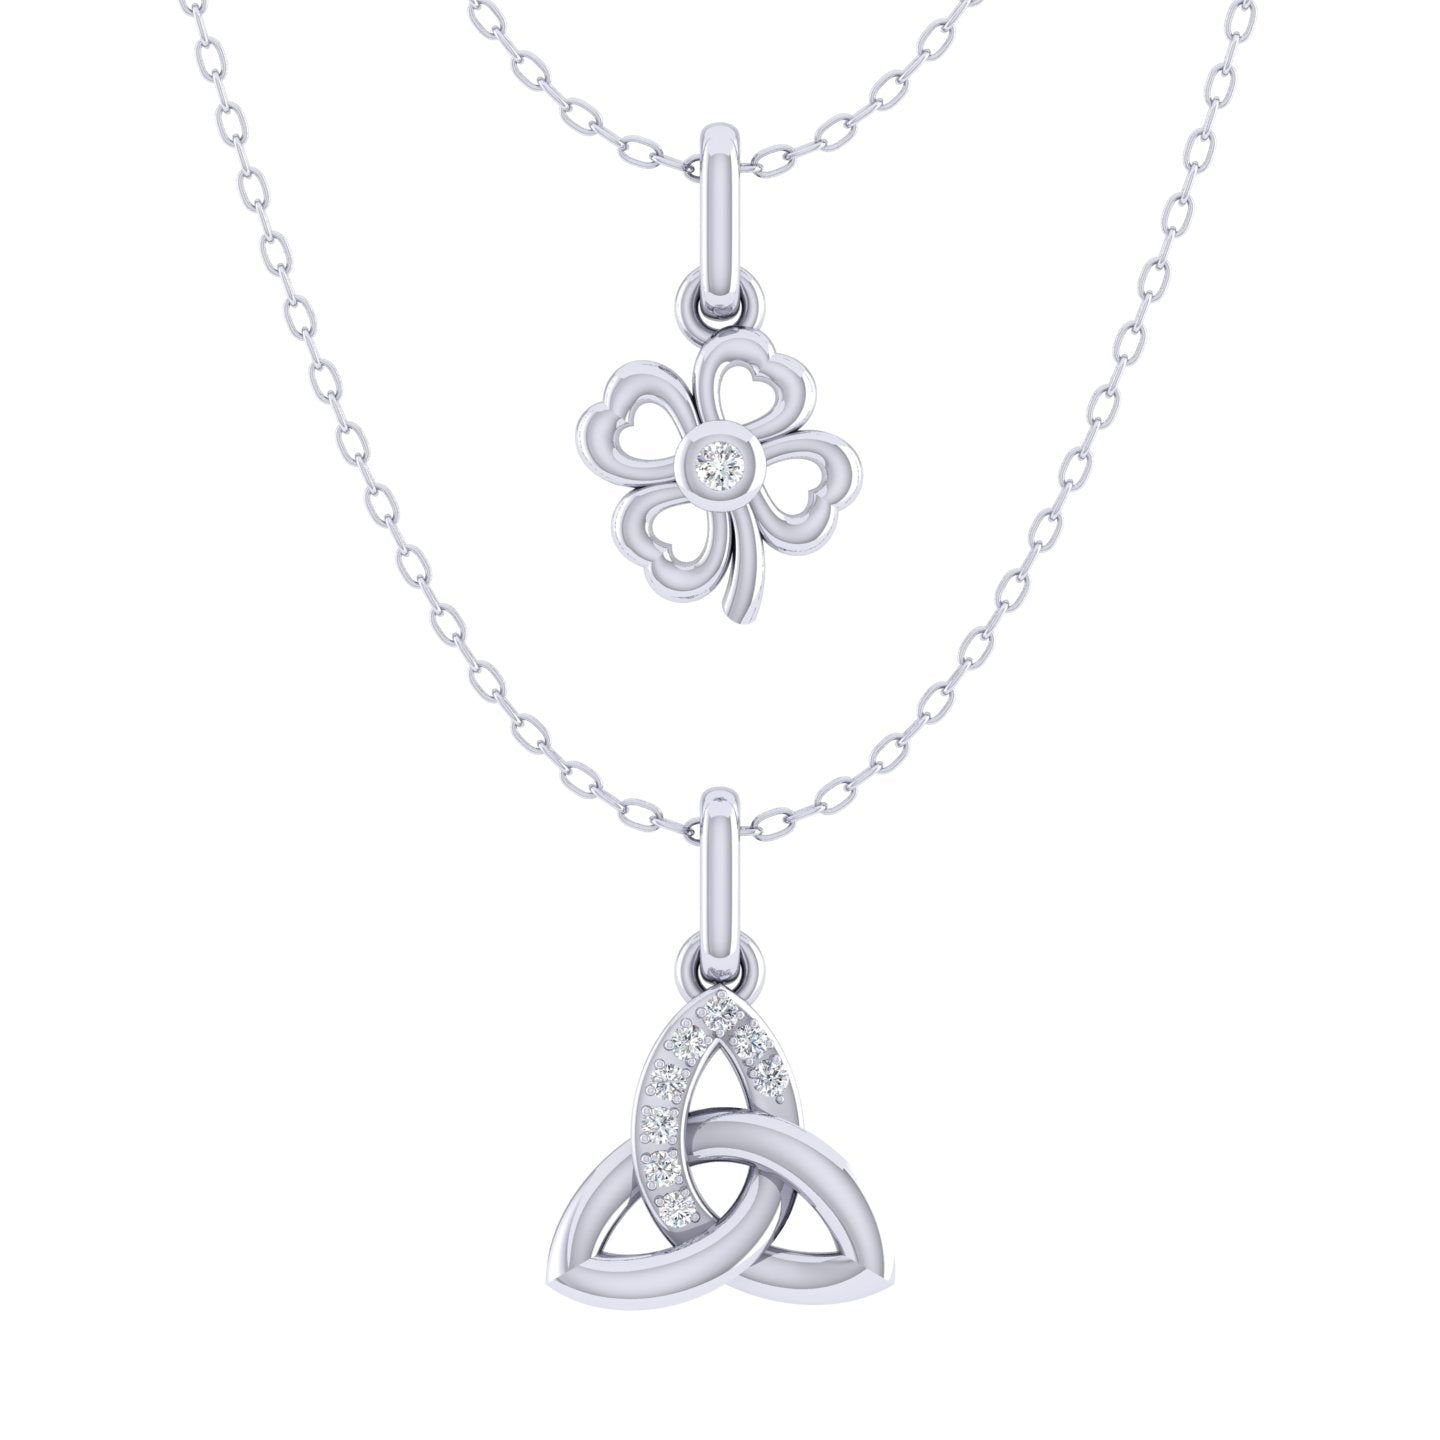 Four Leaf Clover and Celtic Trinity Knot Layered 1/20 Cttw Natural Diamond Pendant Necklace set in 925 Sterling Silver…